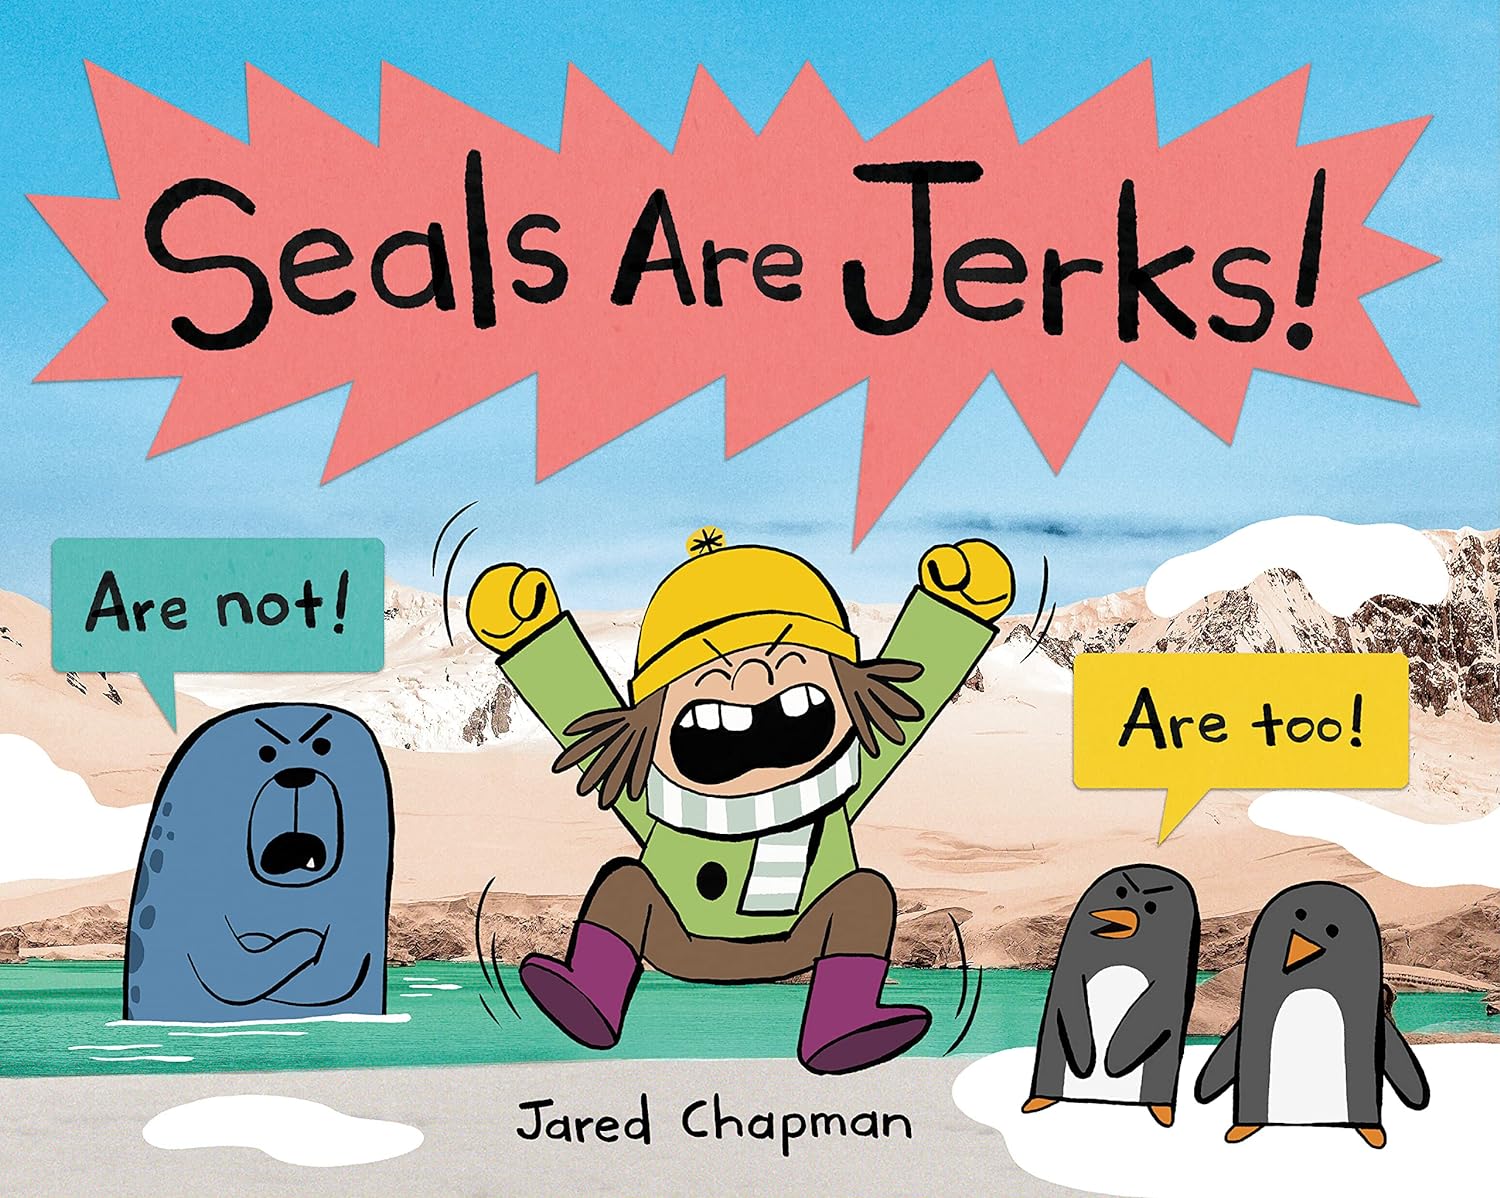 Image of "Seals are Jerks"